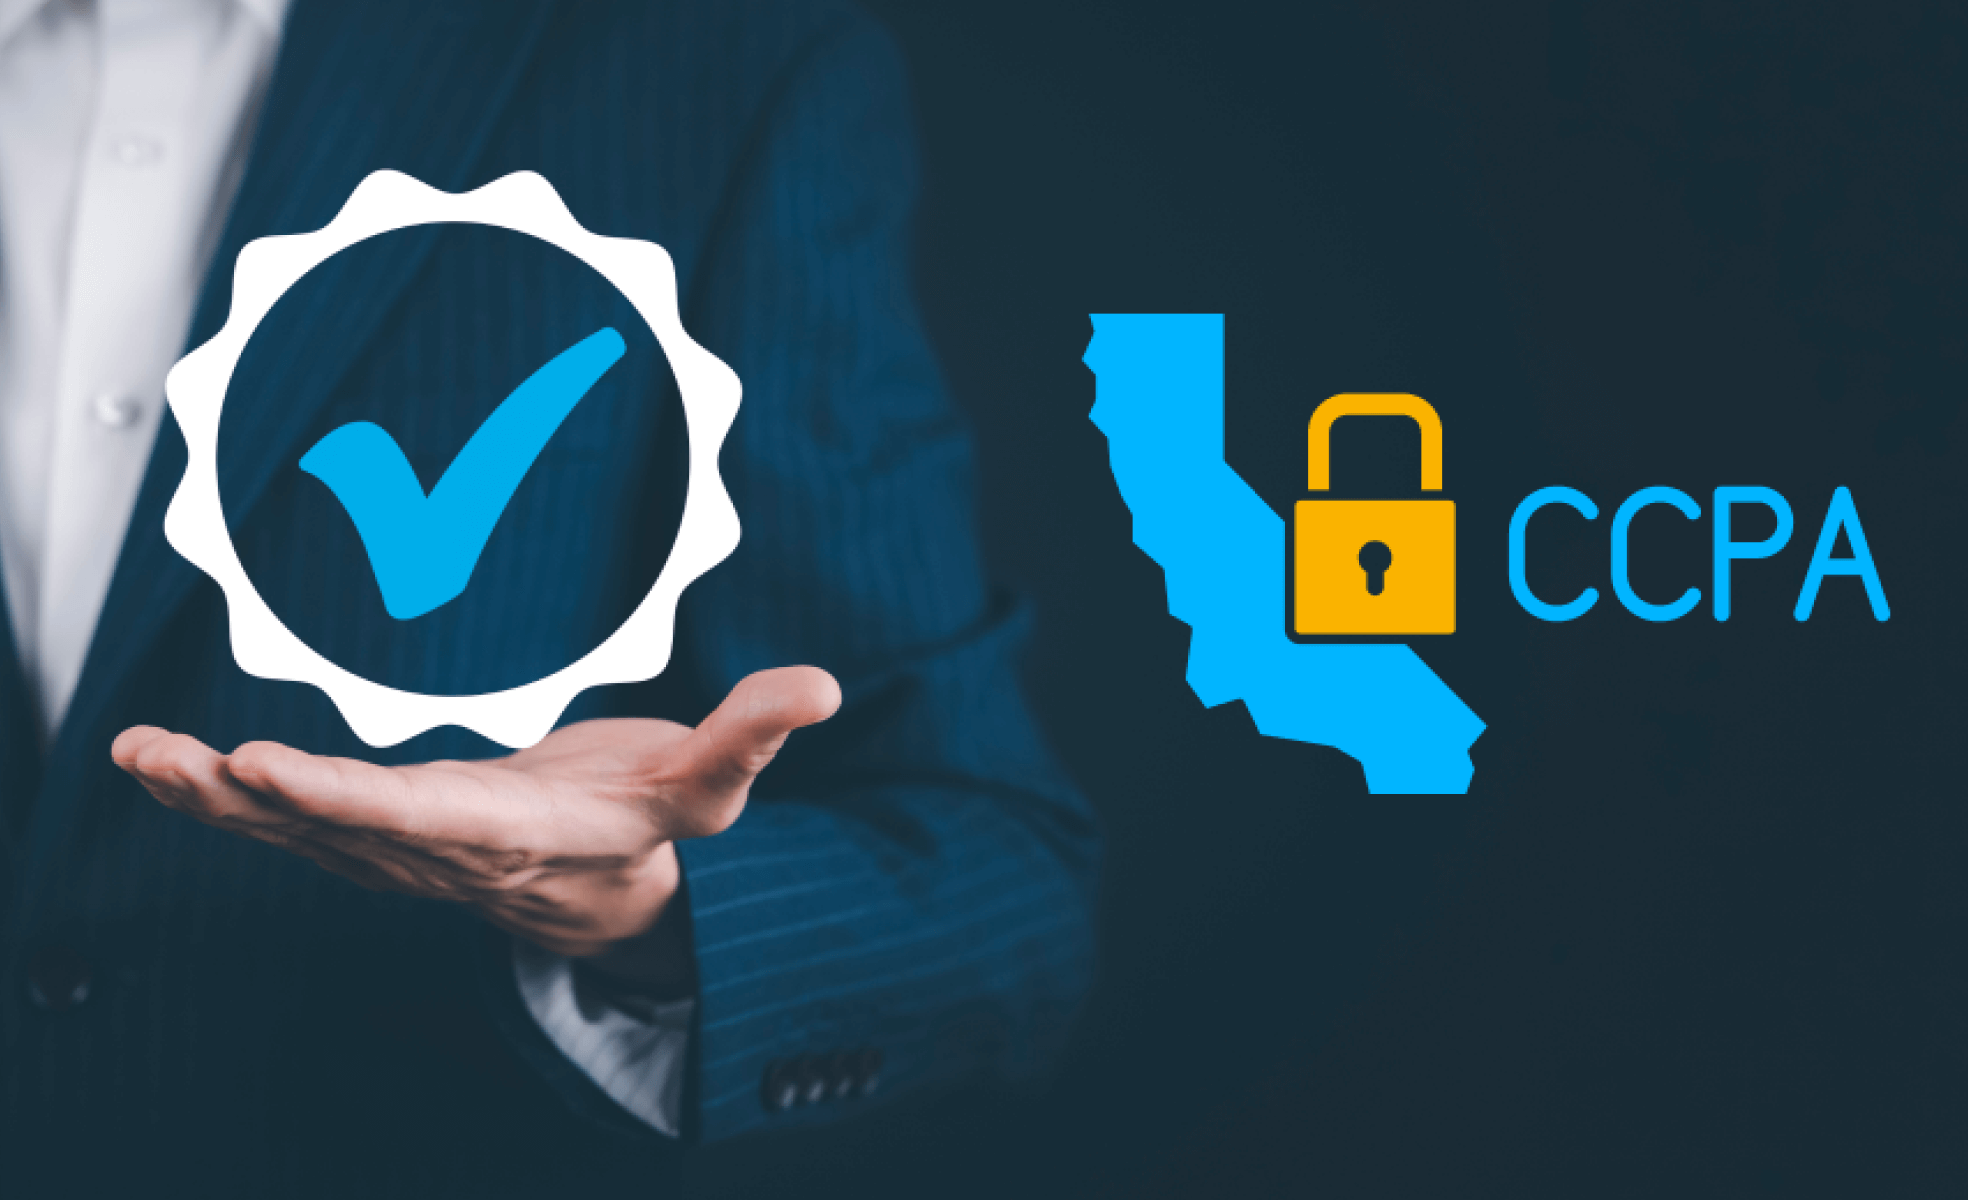 The KYB Successfully Attains CCPA Certification _ Representing Exemplary Data Privacy Protocols